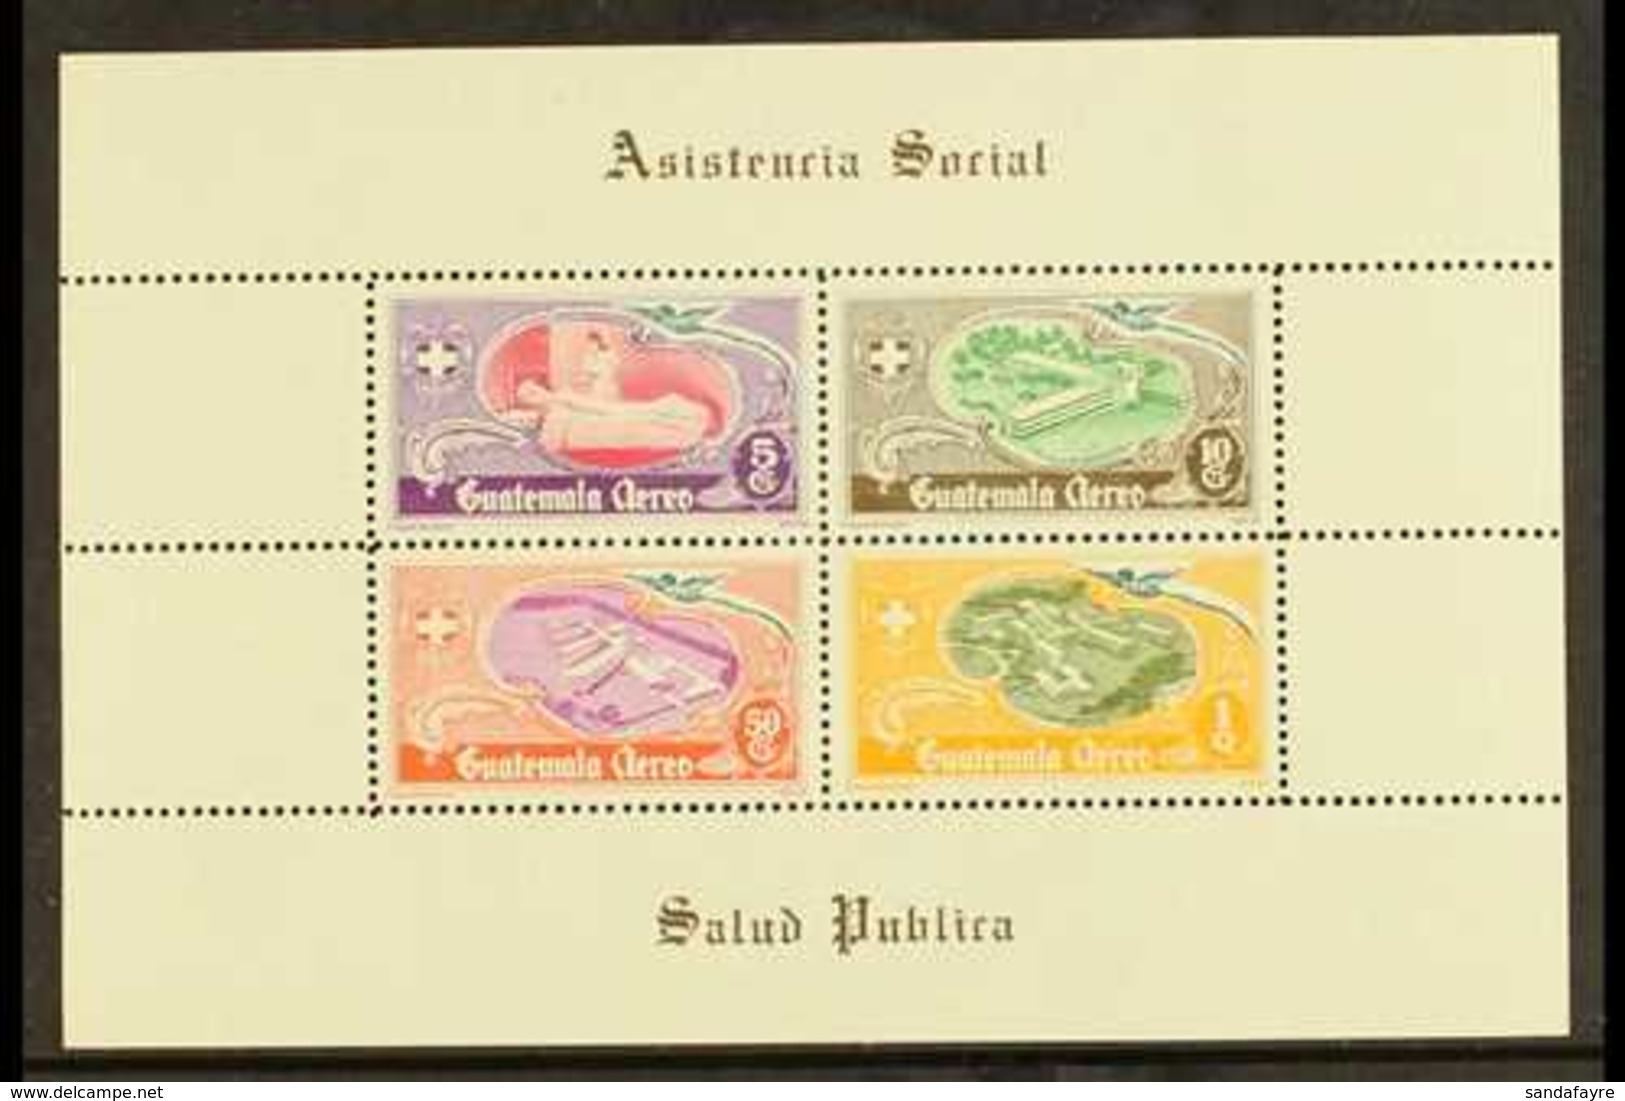 1950 National Hospital Fund Airs Miniature Sheet Showing DOUBLE PRINTED Olive Colour, As SG MS515, Scott C180a, Fine Nev - Guatemala